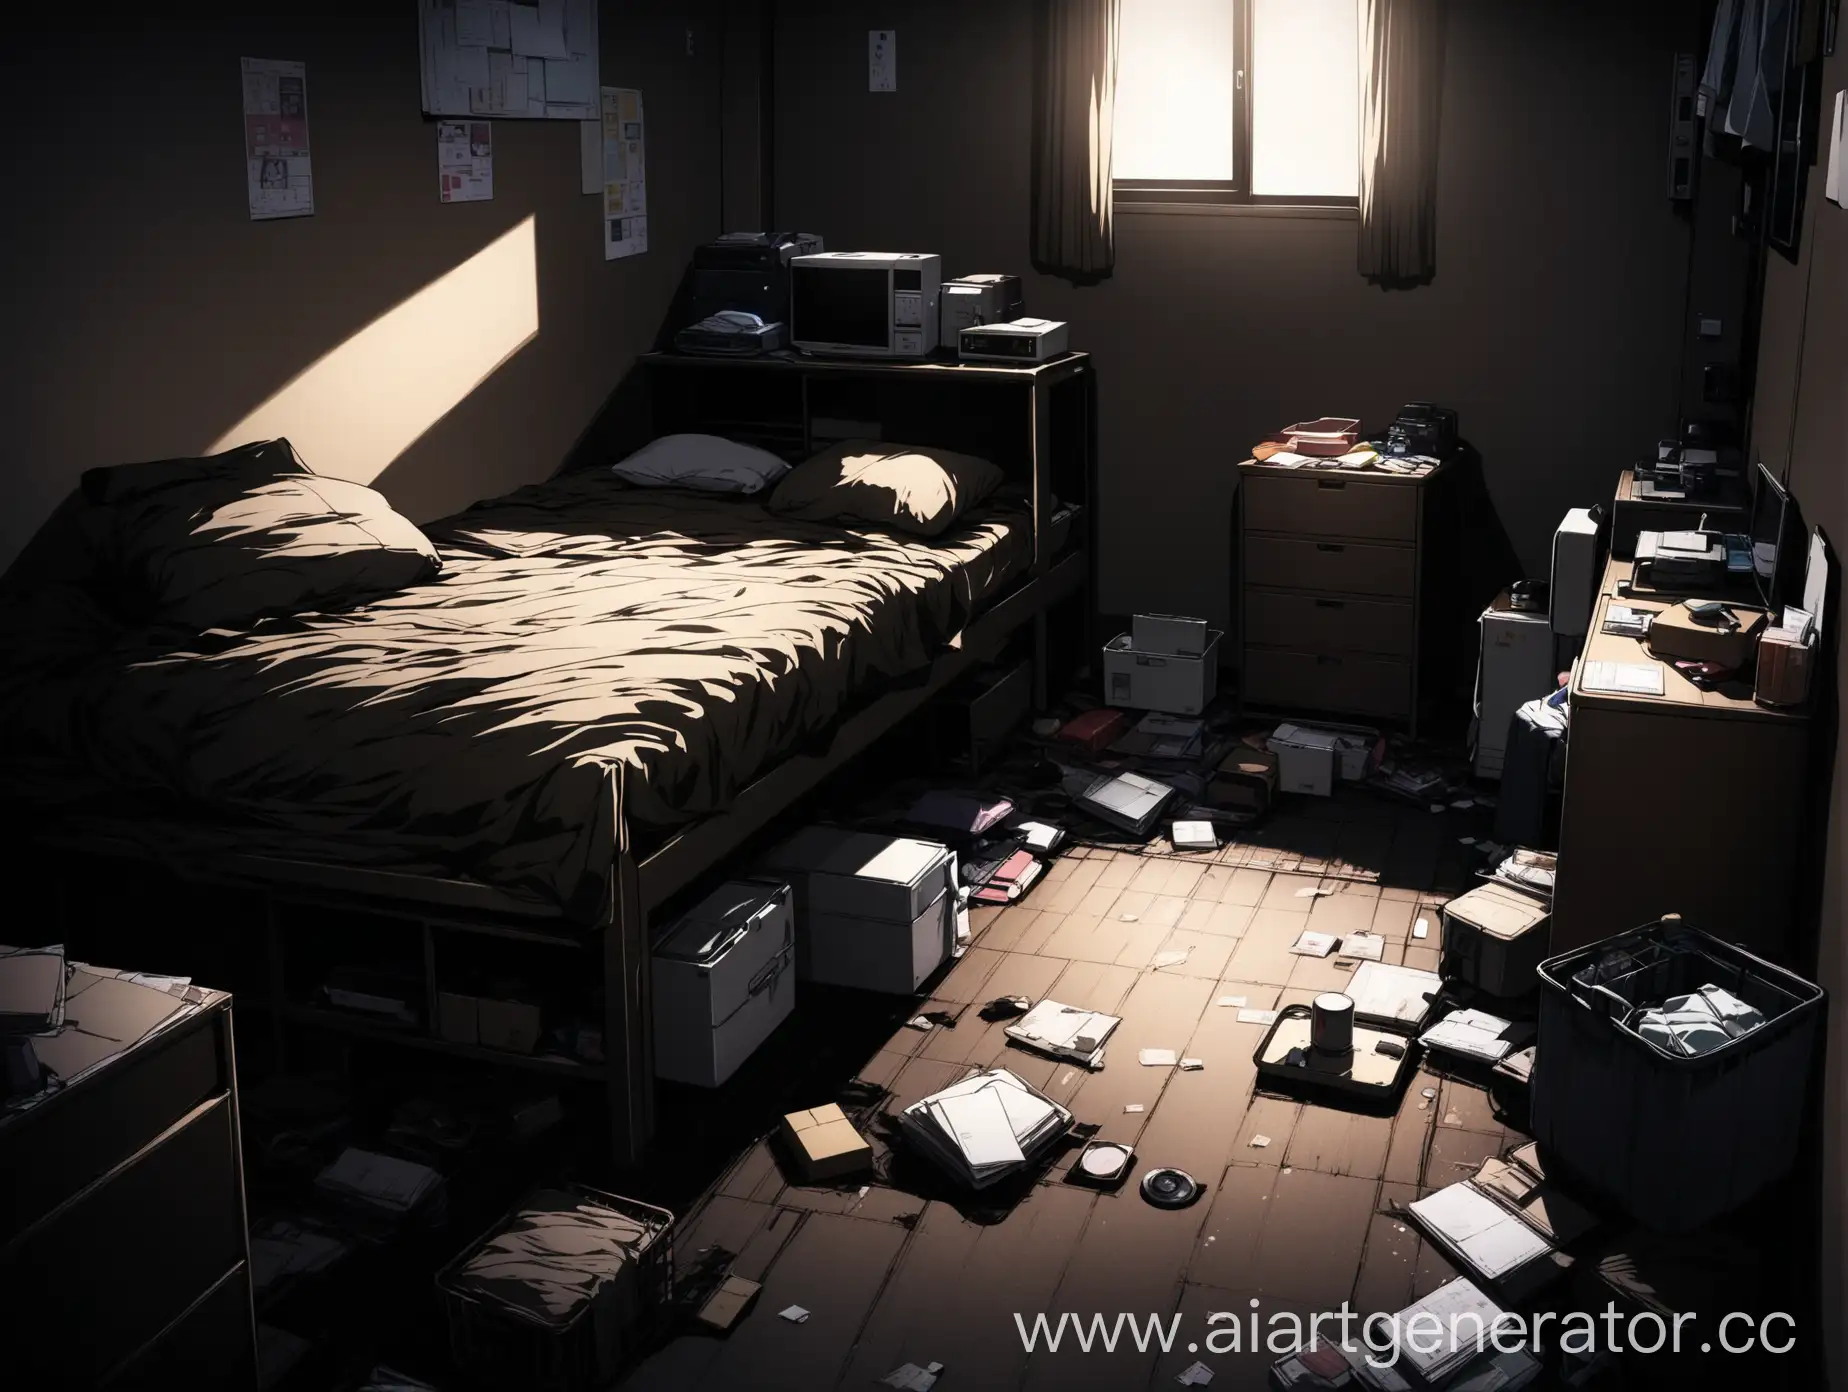 Cluttered-Hikkikomori-Apartment-A-Glimpse-into-Isolation-and-Disorder